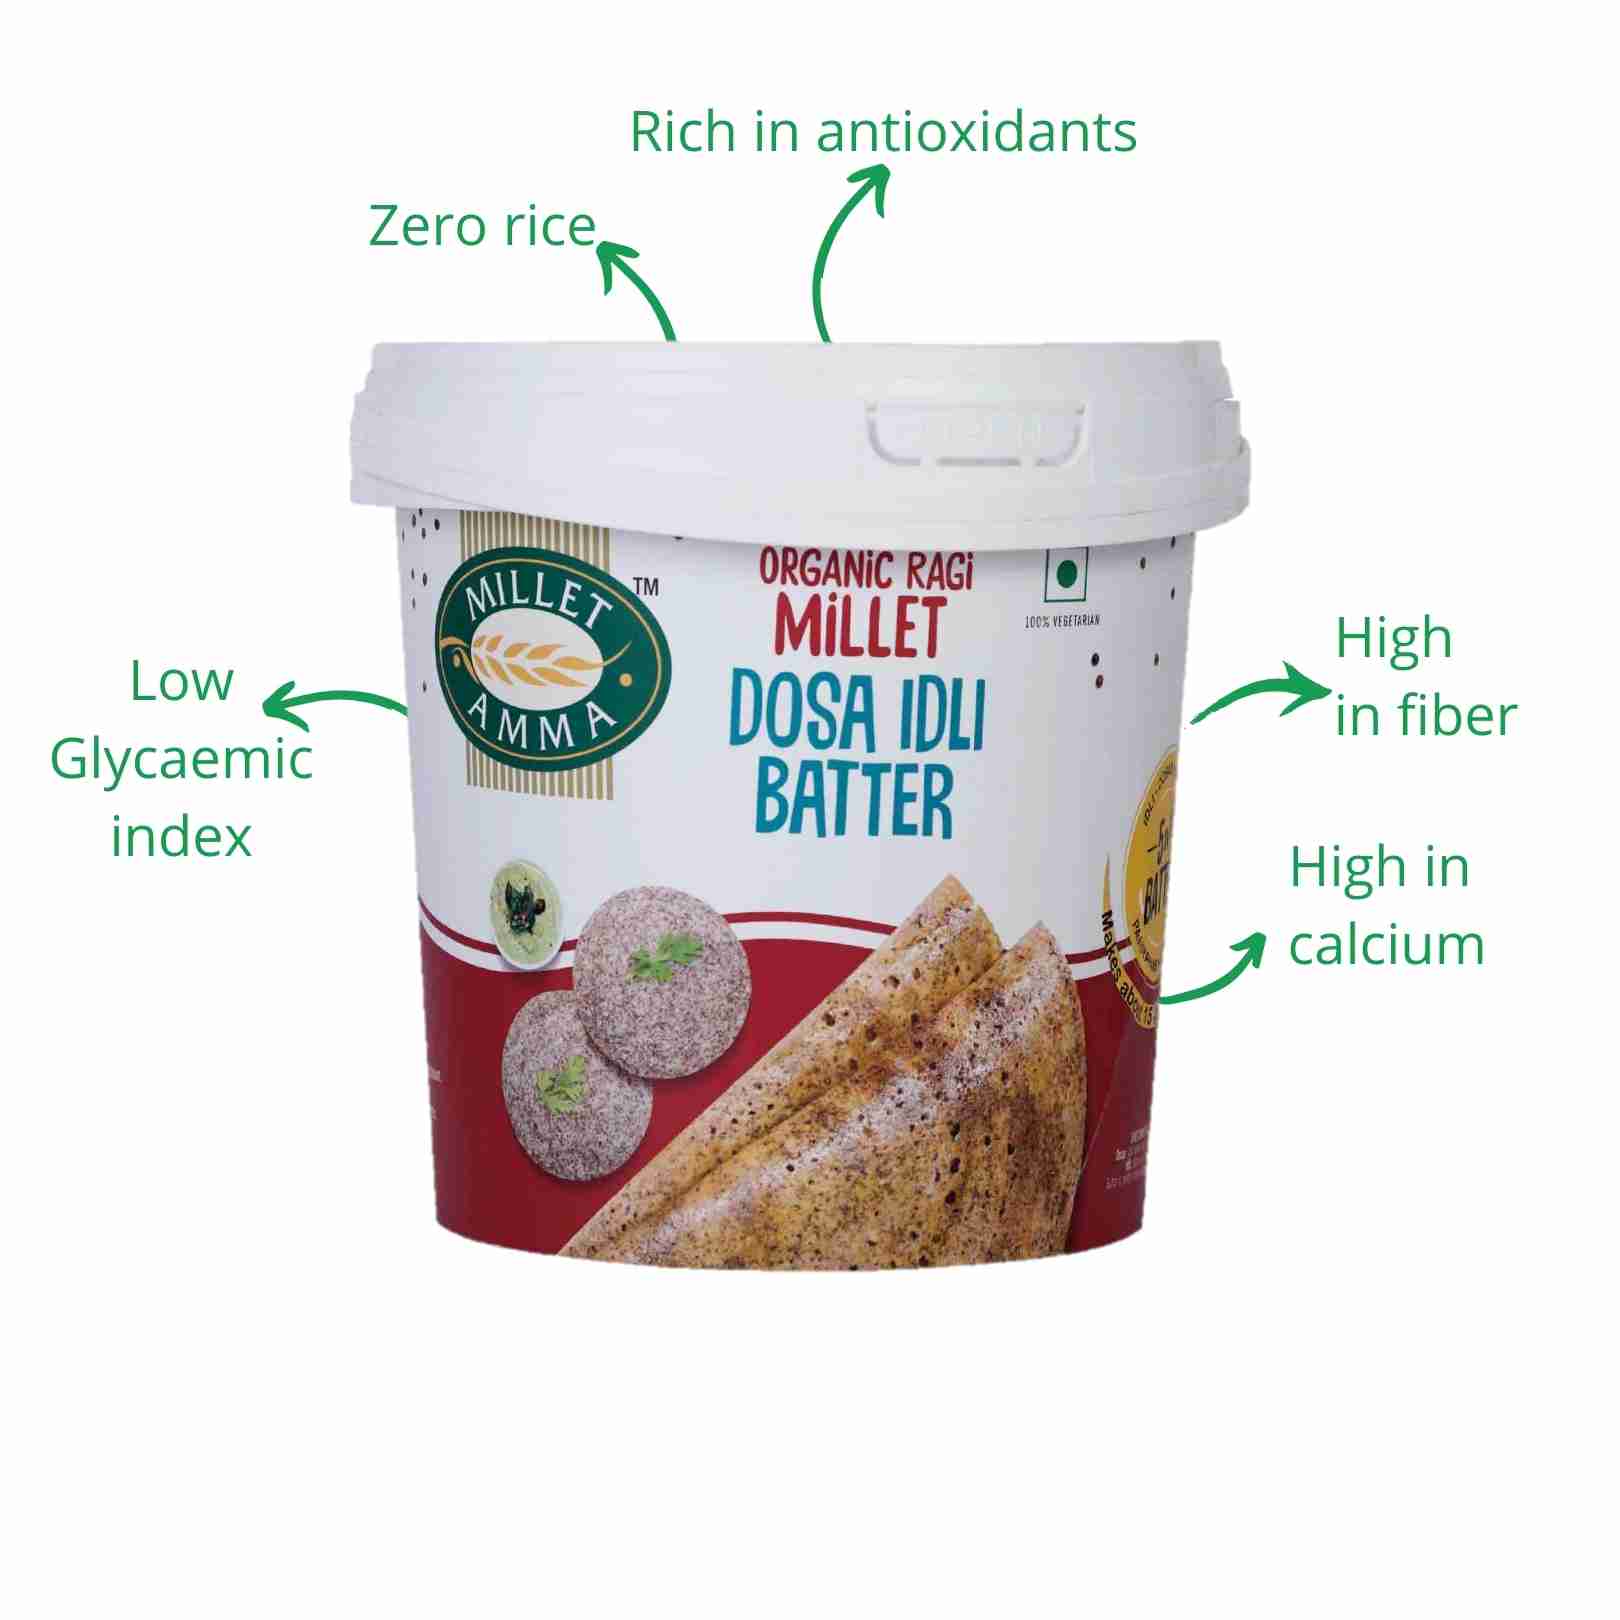 Millet Amma’s Organic Ragi Millet Batter- Who doesn’t love Idli and Dosa?Try our yummy Organic Ragi Millet Idli Dosa Batter for a yummy and healthy breakfast.  Made with Ragi millet and Urad dal, it aids with weight management, by keeping you satiated for longer.   Ragi millet has 3 times more Calcium than milk, it is high in fiber and amino acids, aids digestion and fortifies bone density. It is suitable for all ages.